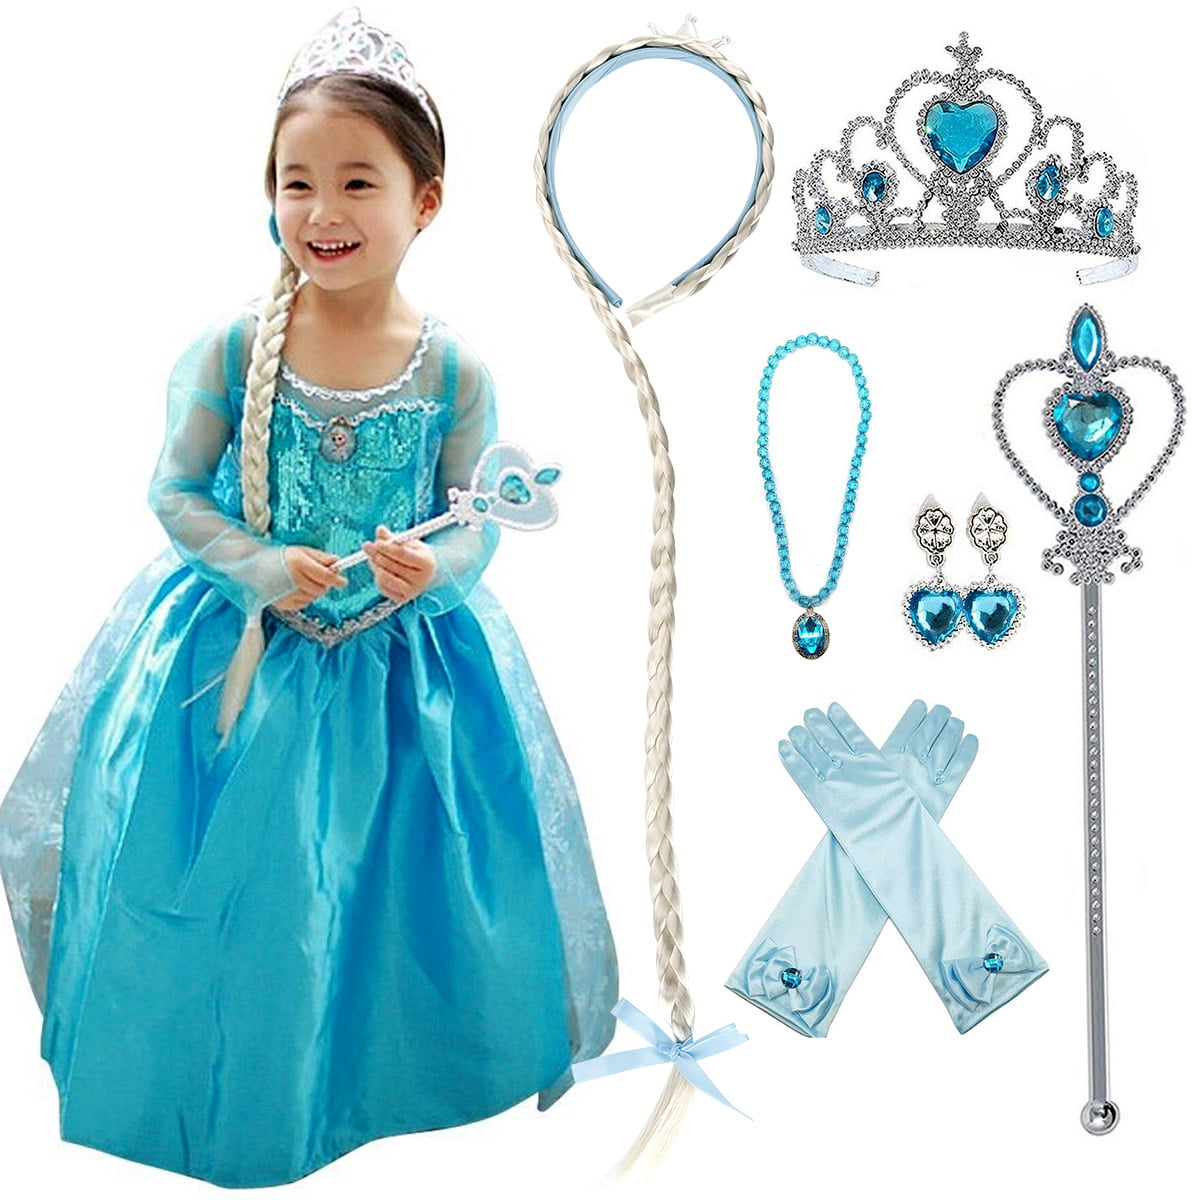 Girl Kid Party Dresses Queen Costume Cosplay Kids Princess gloves+crown 